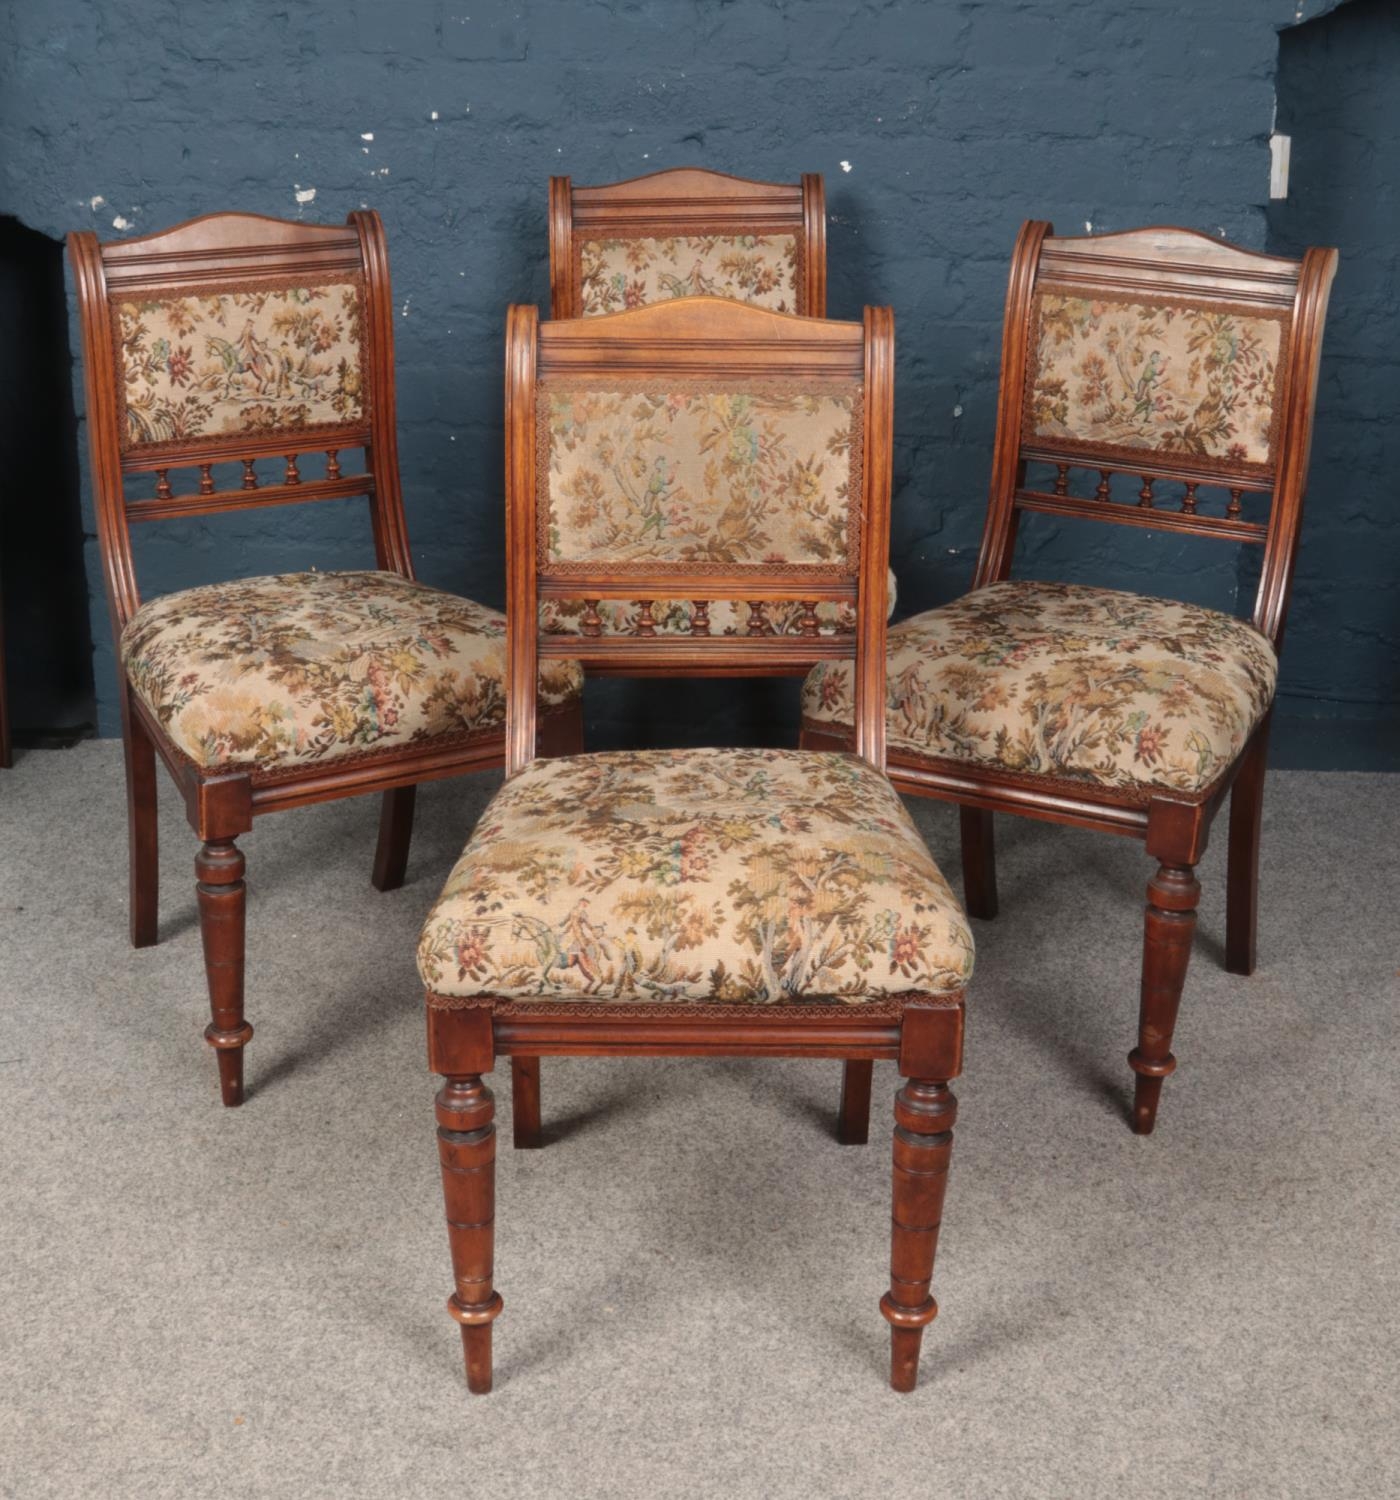 A set of four mahogany dining chairs. With upholstered seats and back rests.